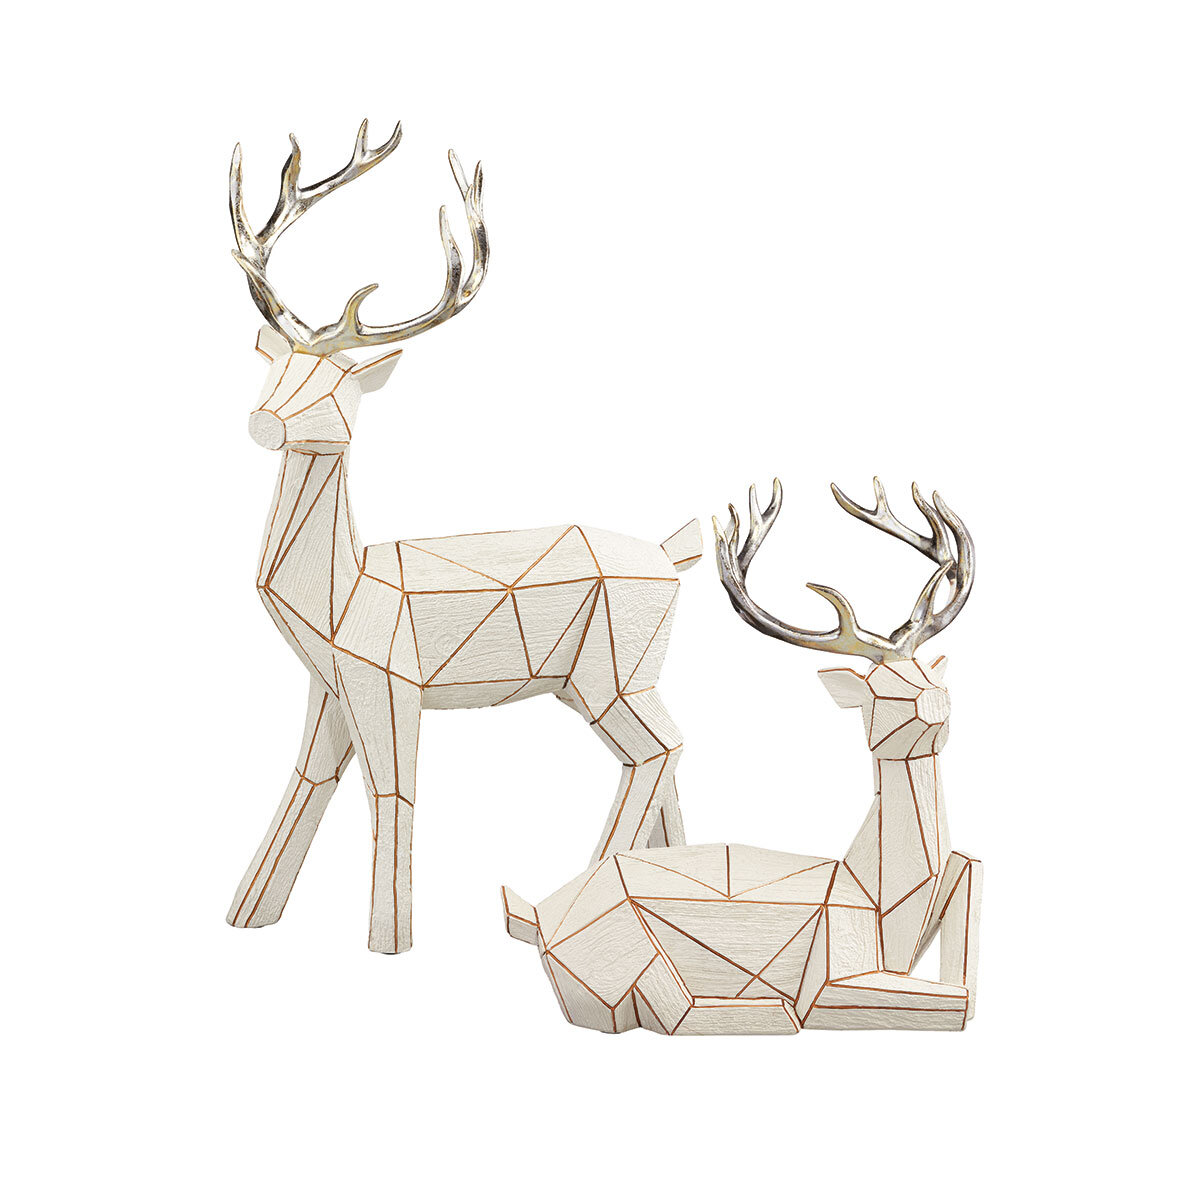 Buy 2pc Geometric Deer Overview Image at Costco.co.uk